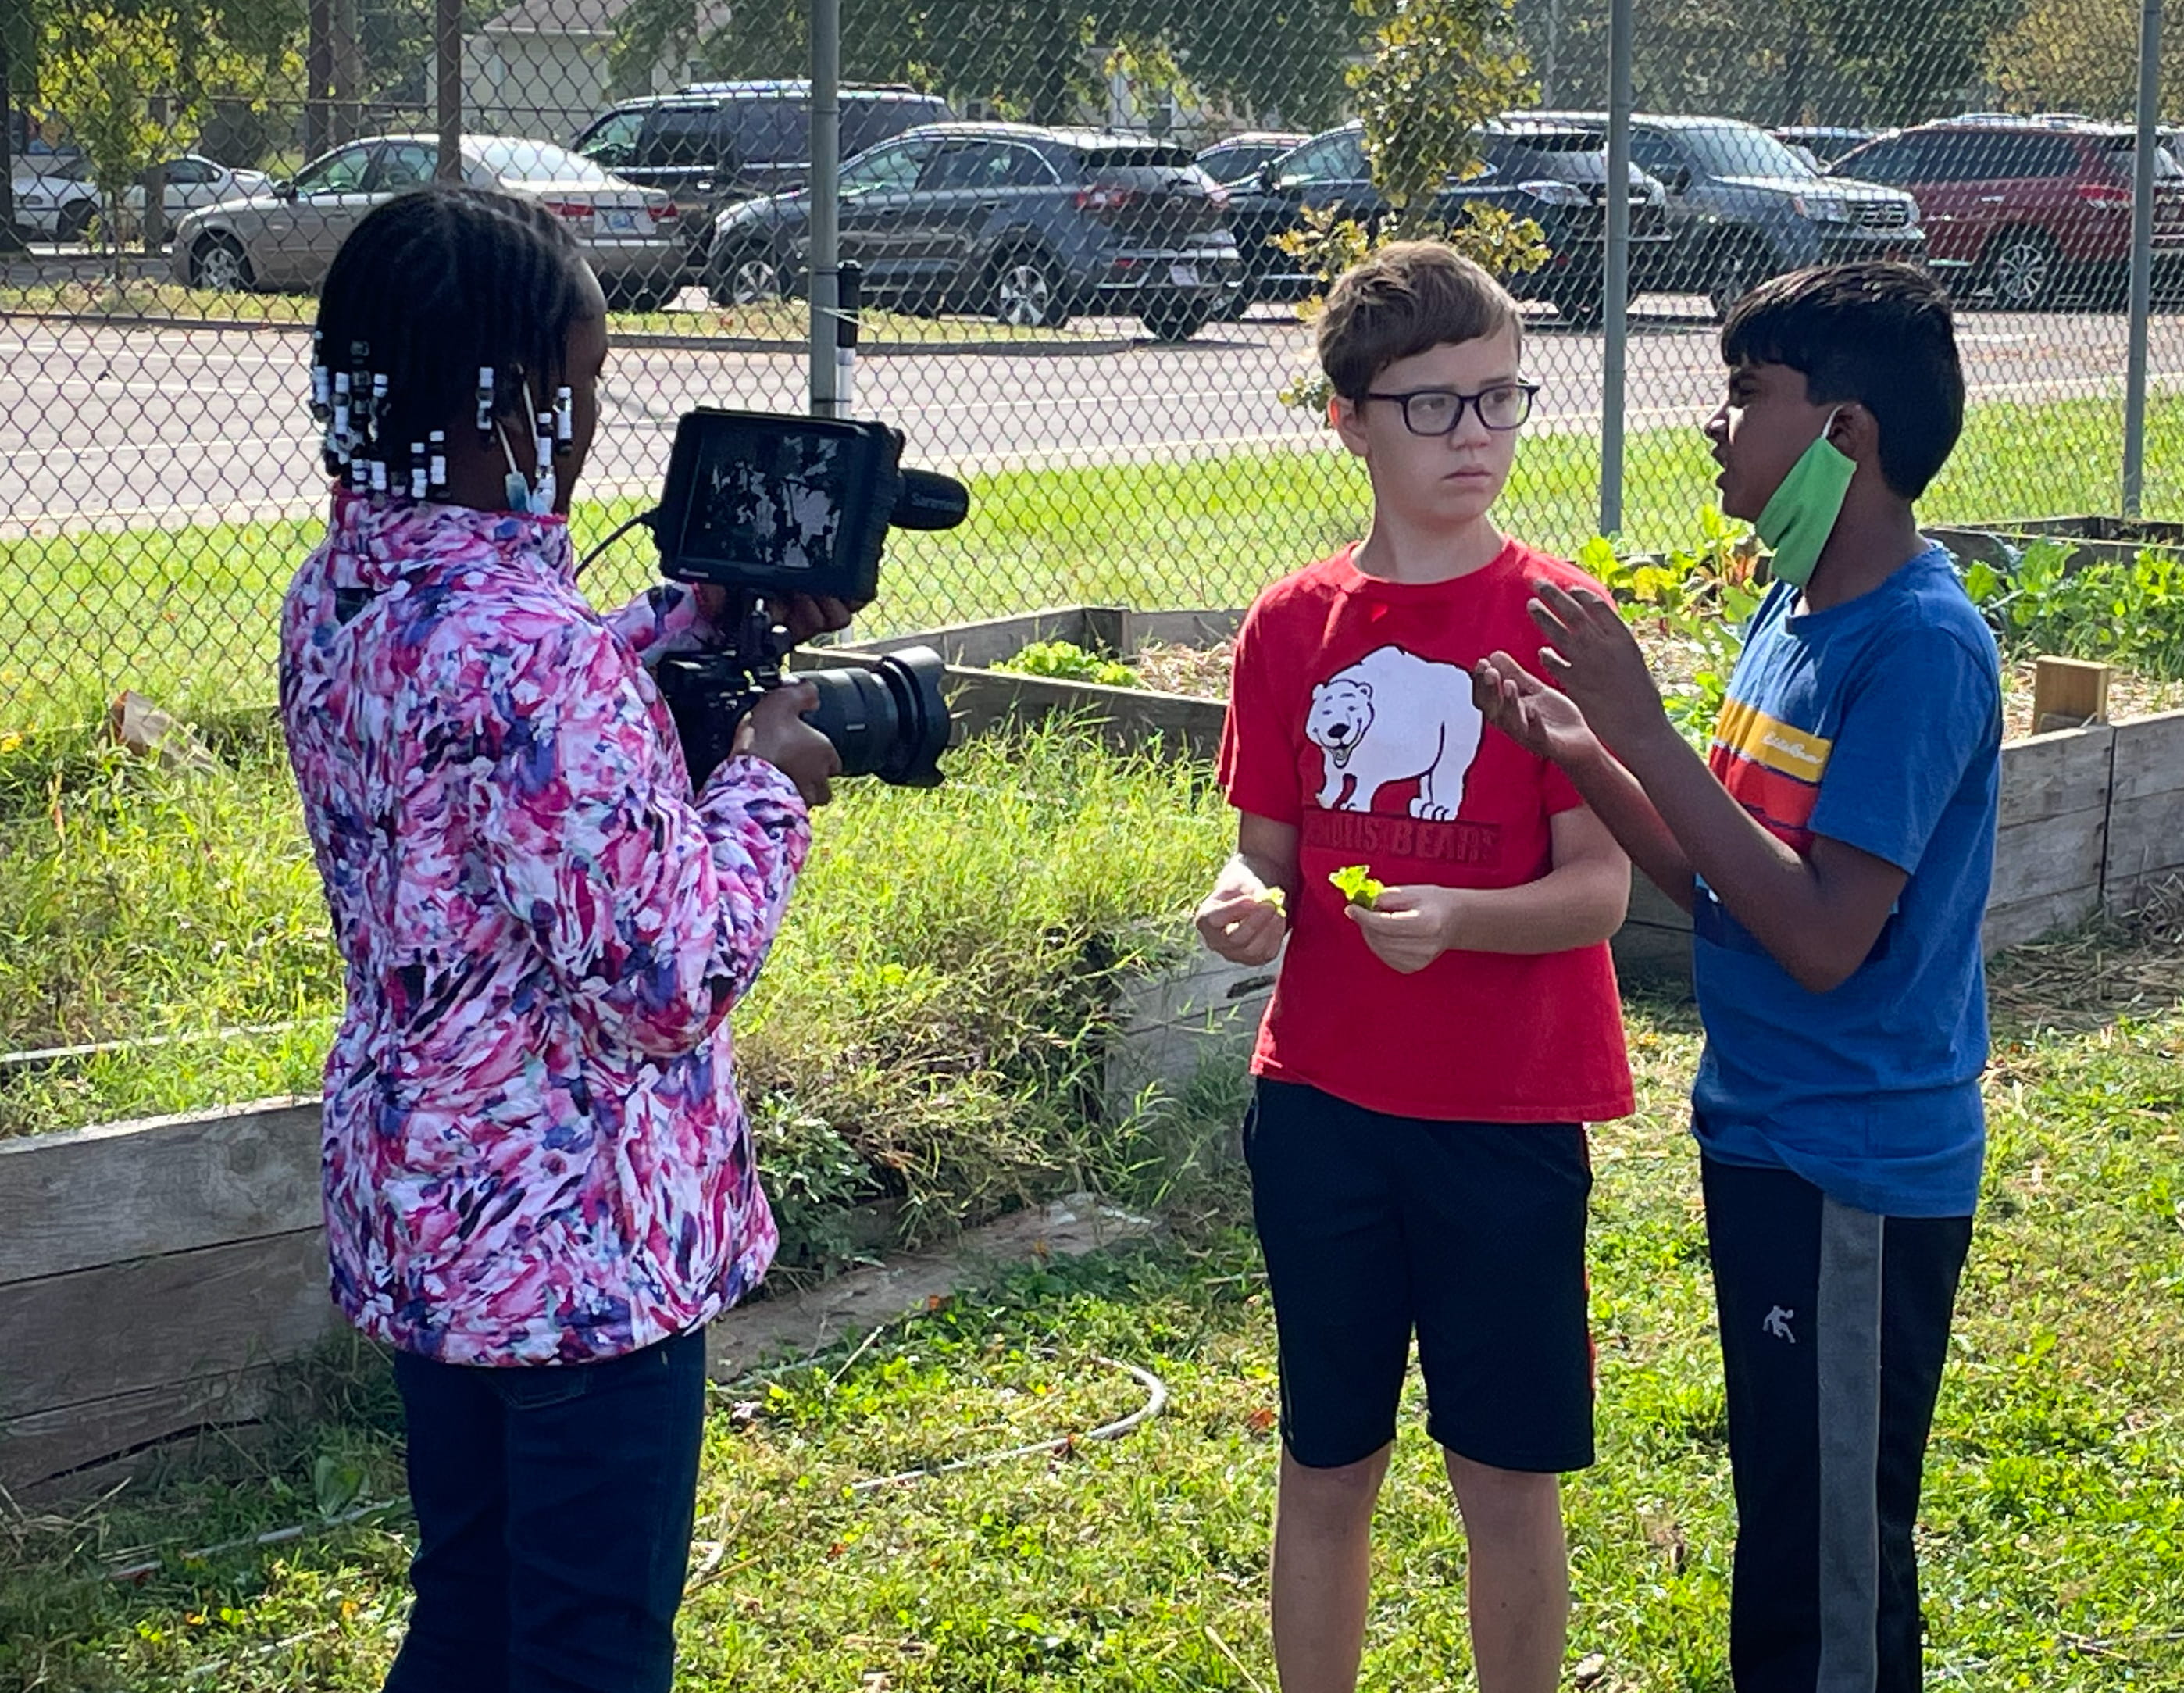 Students at Brandeis Elementary report to the camera what they've observed and learning during their project-based learning lesson.